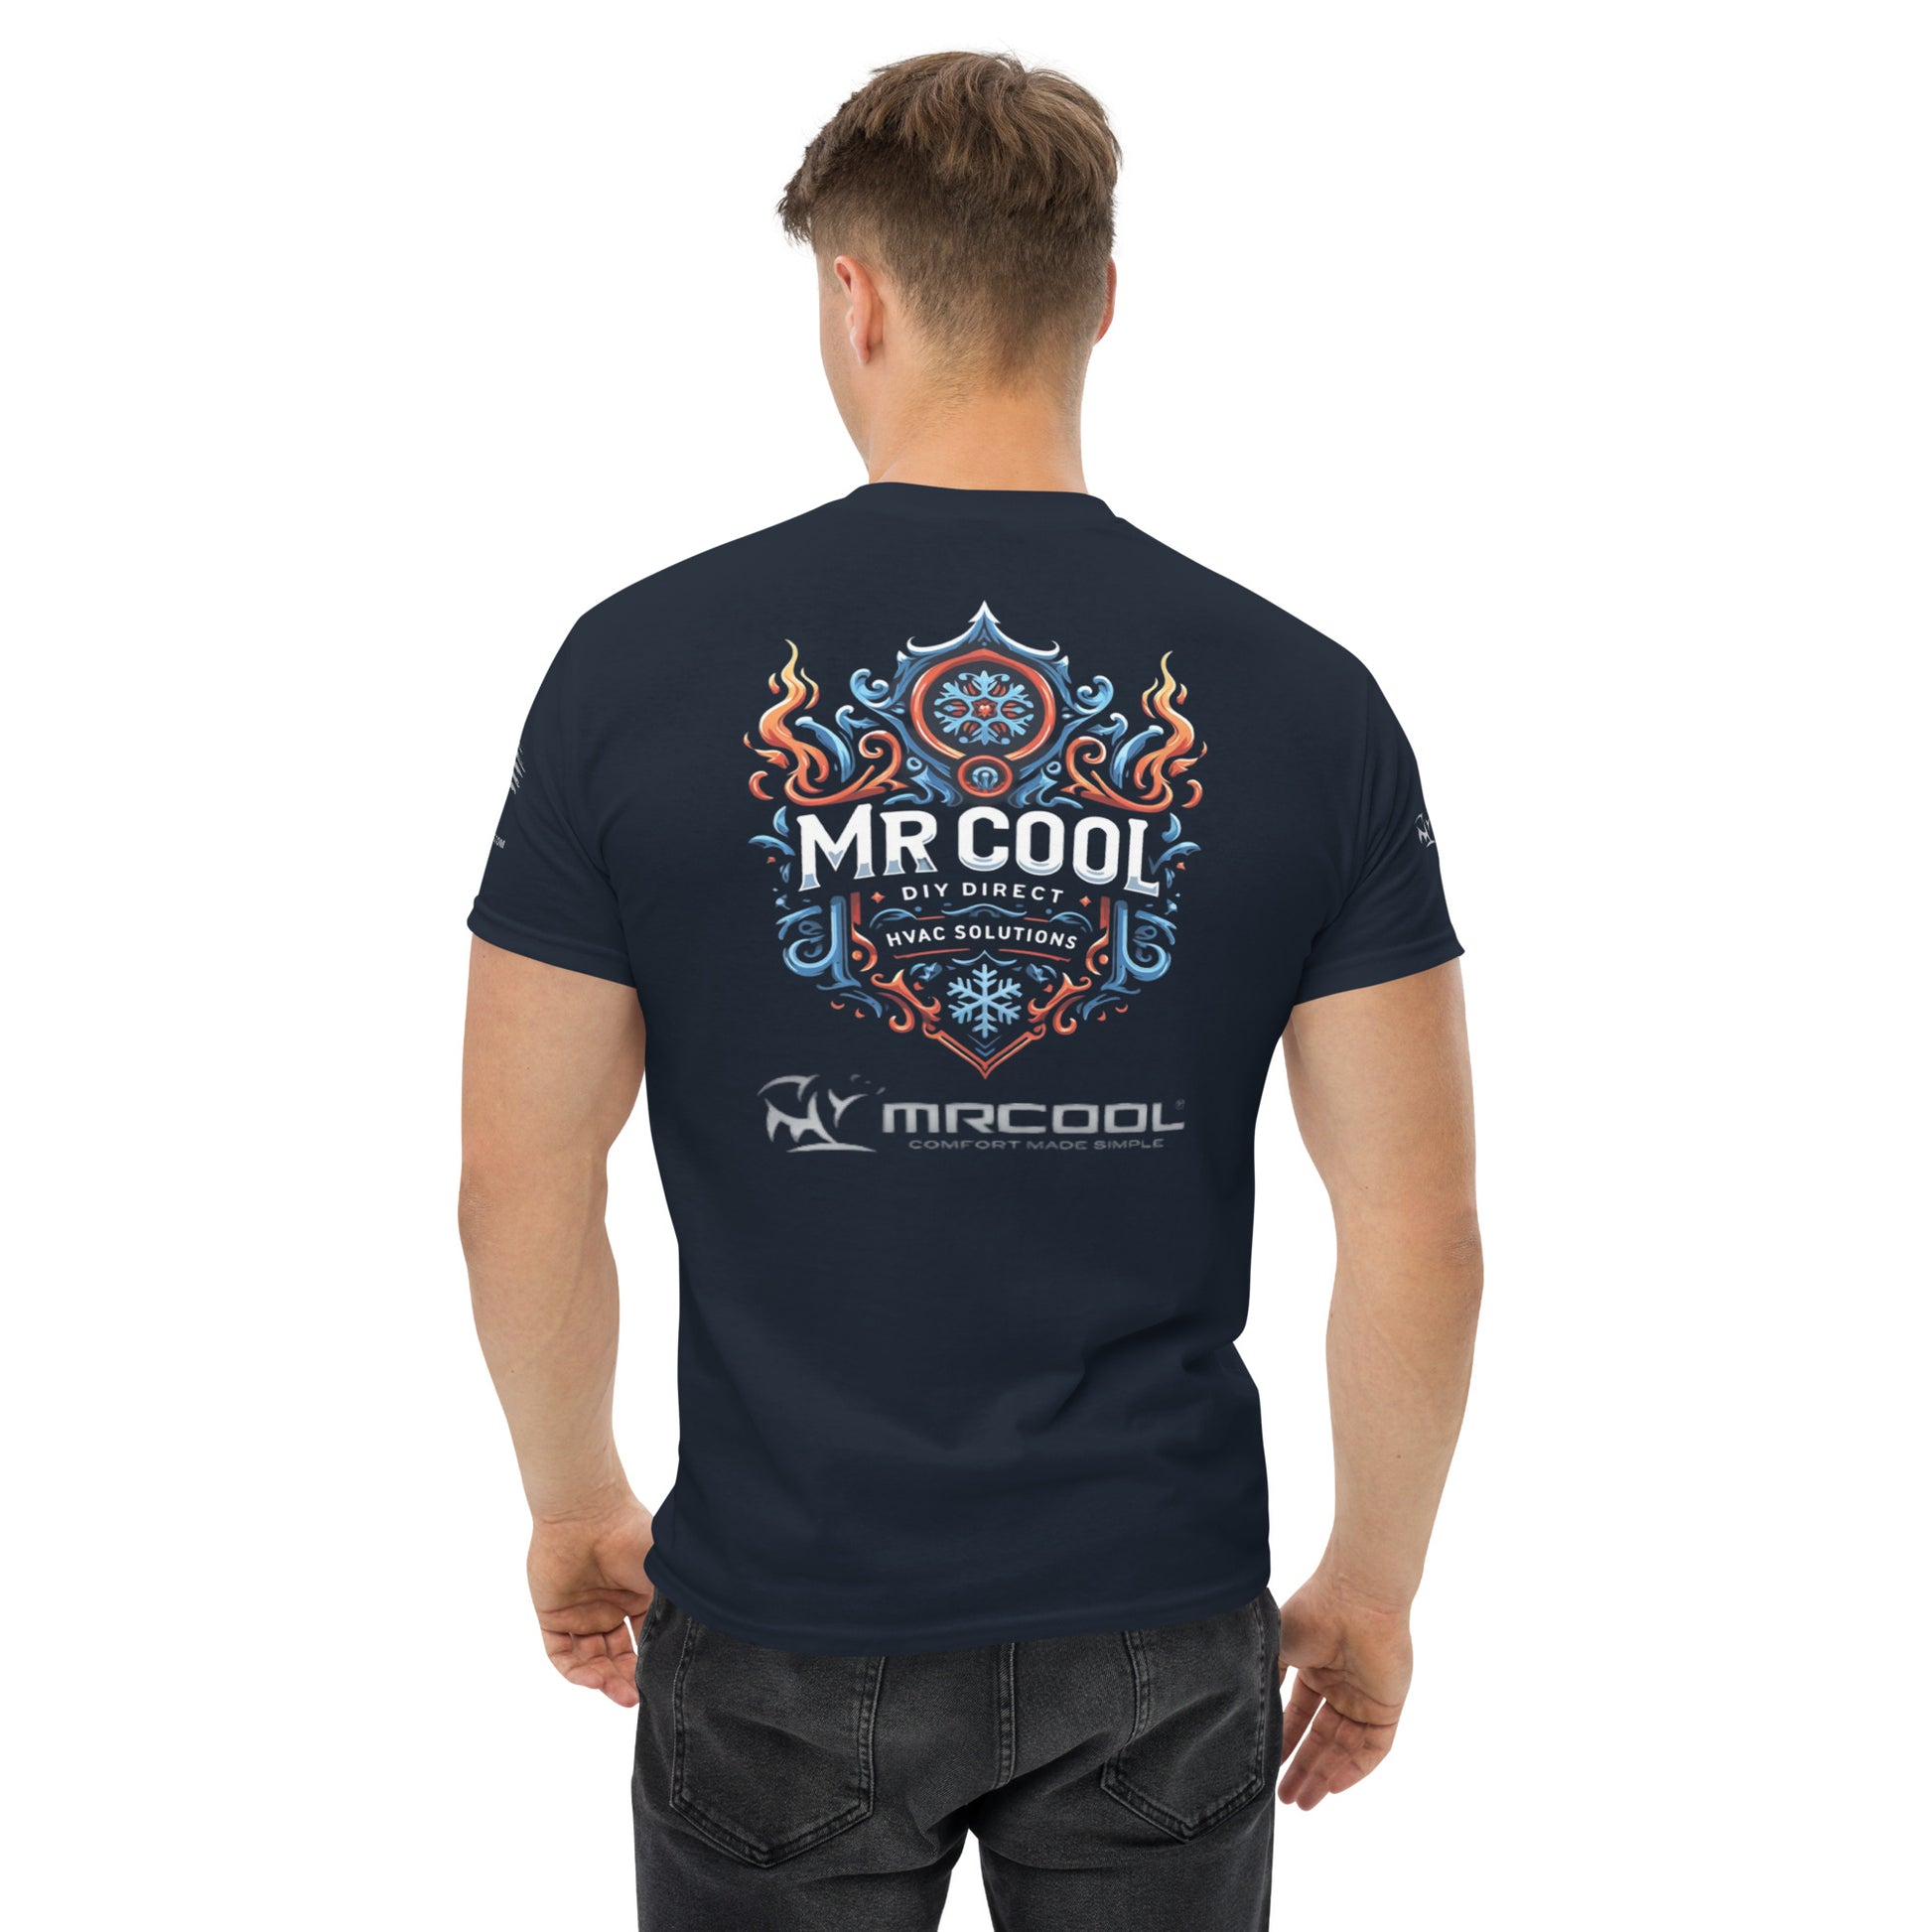 A man viewed from behind wearing an Exclusive HVAC-Themed Custom Tee by MRCOOL DIY Direct with "MR COOL WAKE SURFING" and a swirling flame design in vibrant blue and orange colors on the back.